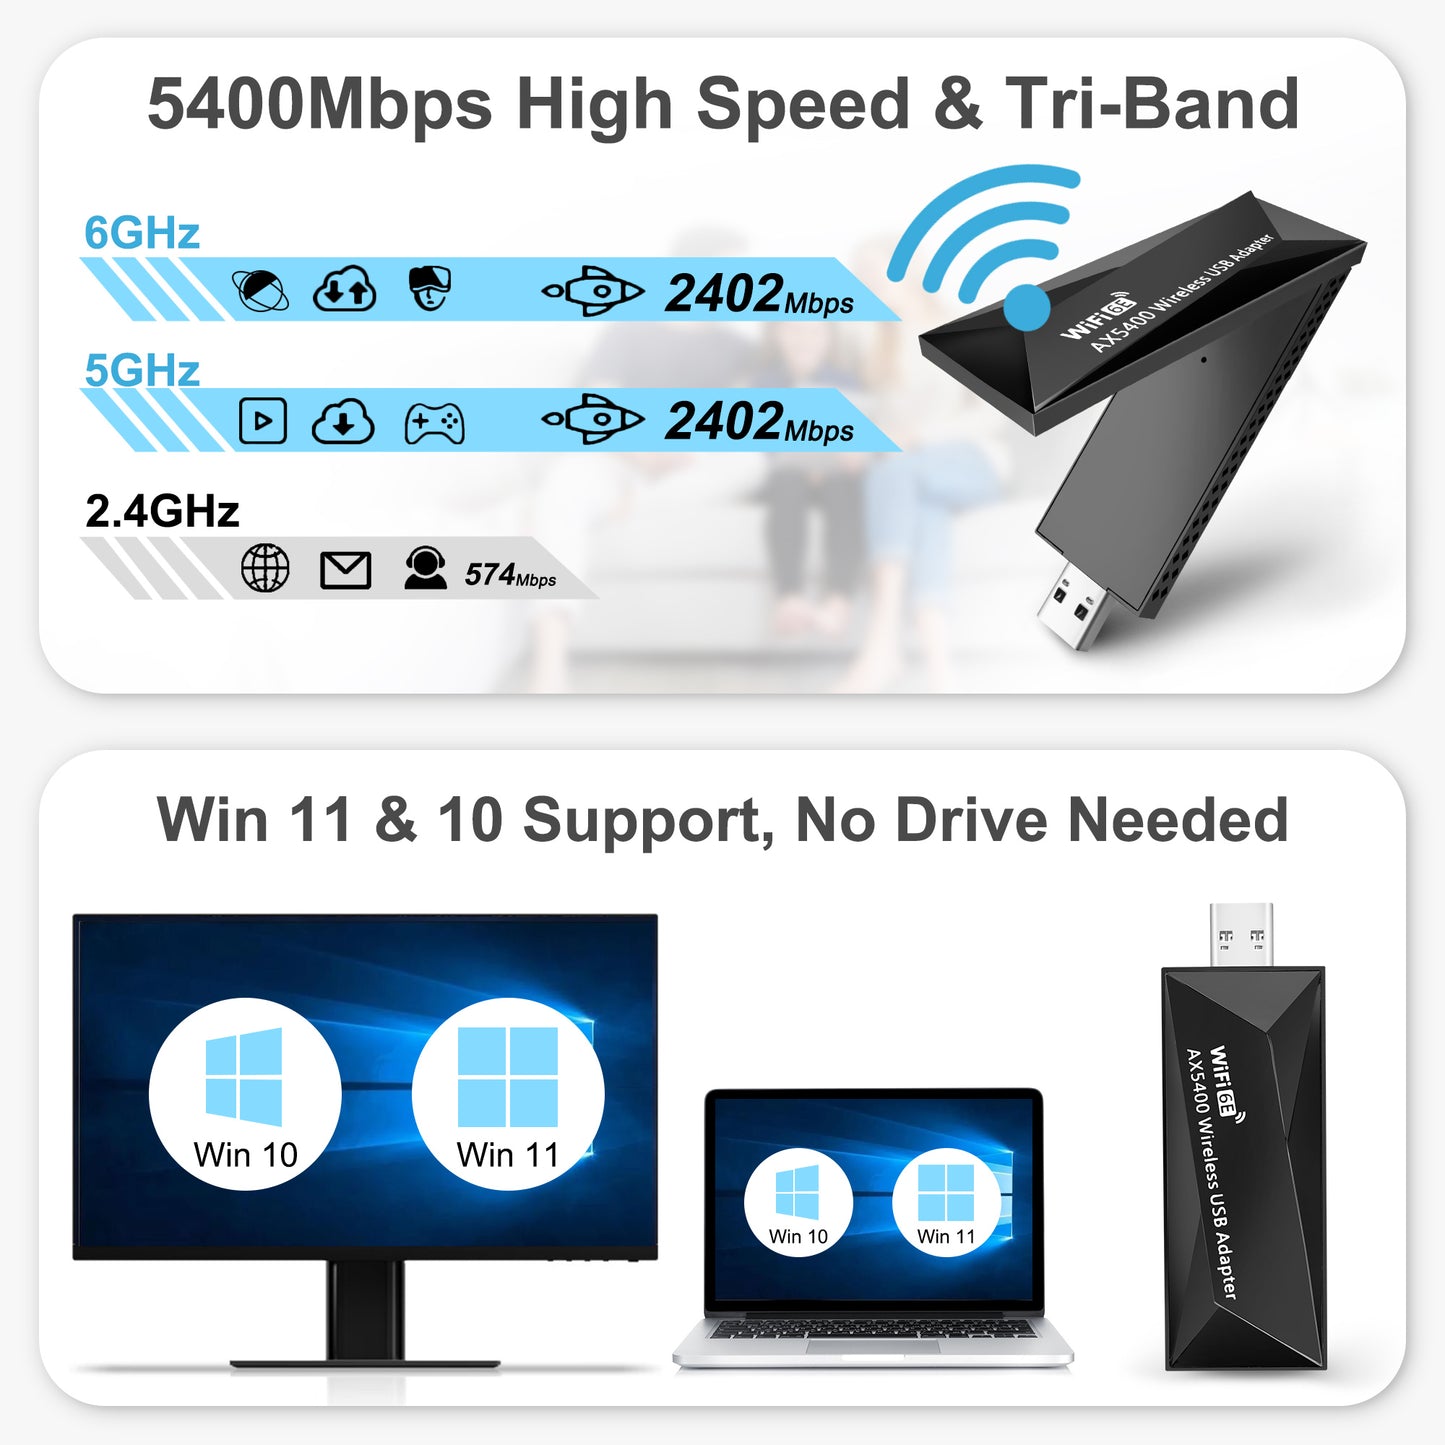 AX5400 802.11AX WiFi 6E USB 3.0 WiFi Adapter - for PC Laptop Tri Band 6GHz/5GHz/2.4GHz, WPA3, Wireless USB WiFi Dongle Network Adapter,Only Compatible with Windows 11/10, Driver free (Black)